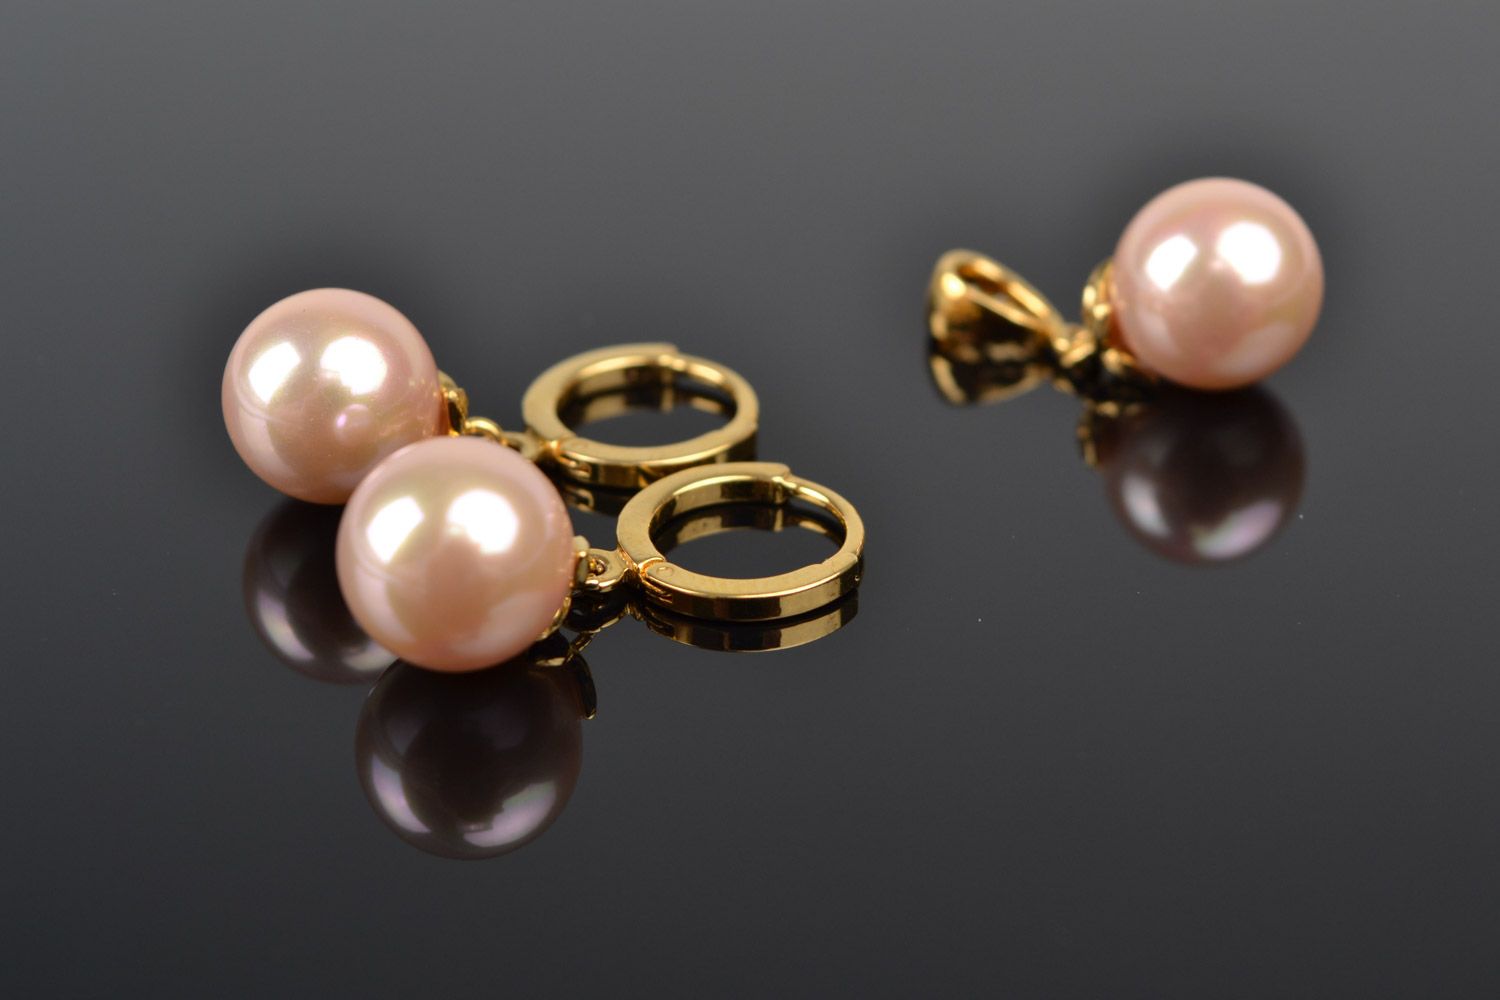 Handmade artificial pearl jewelry set 2 items earrings and pendant with gold like fittings photo 2